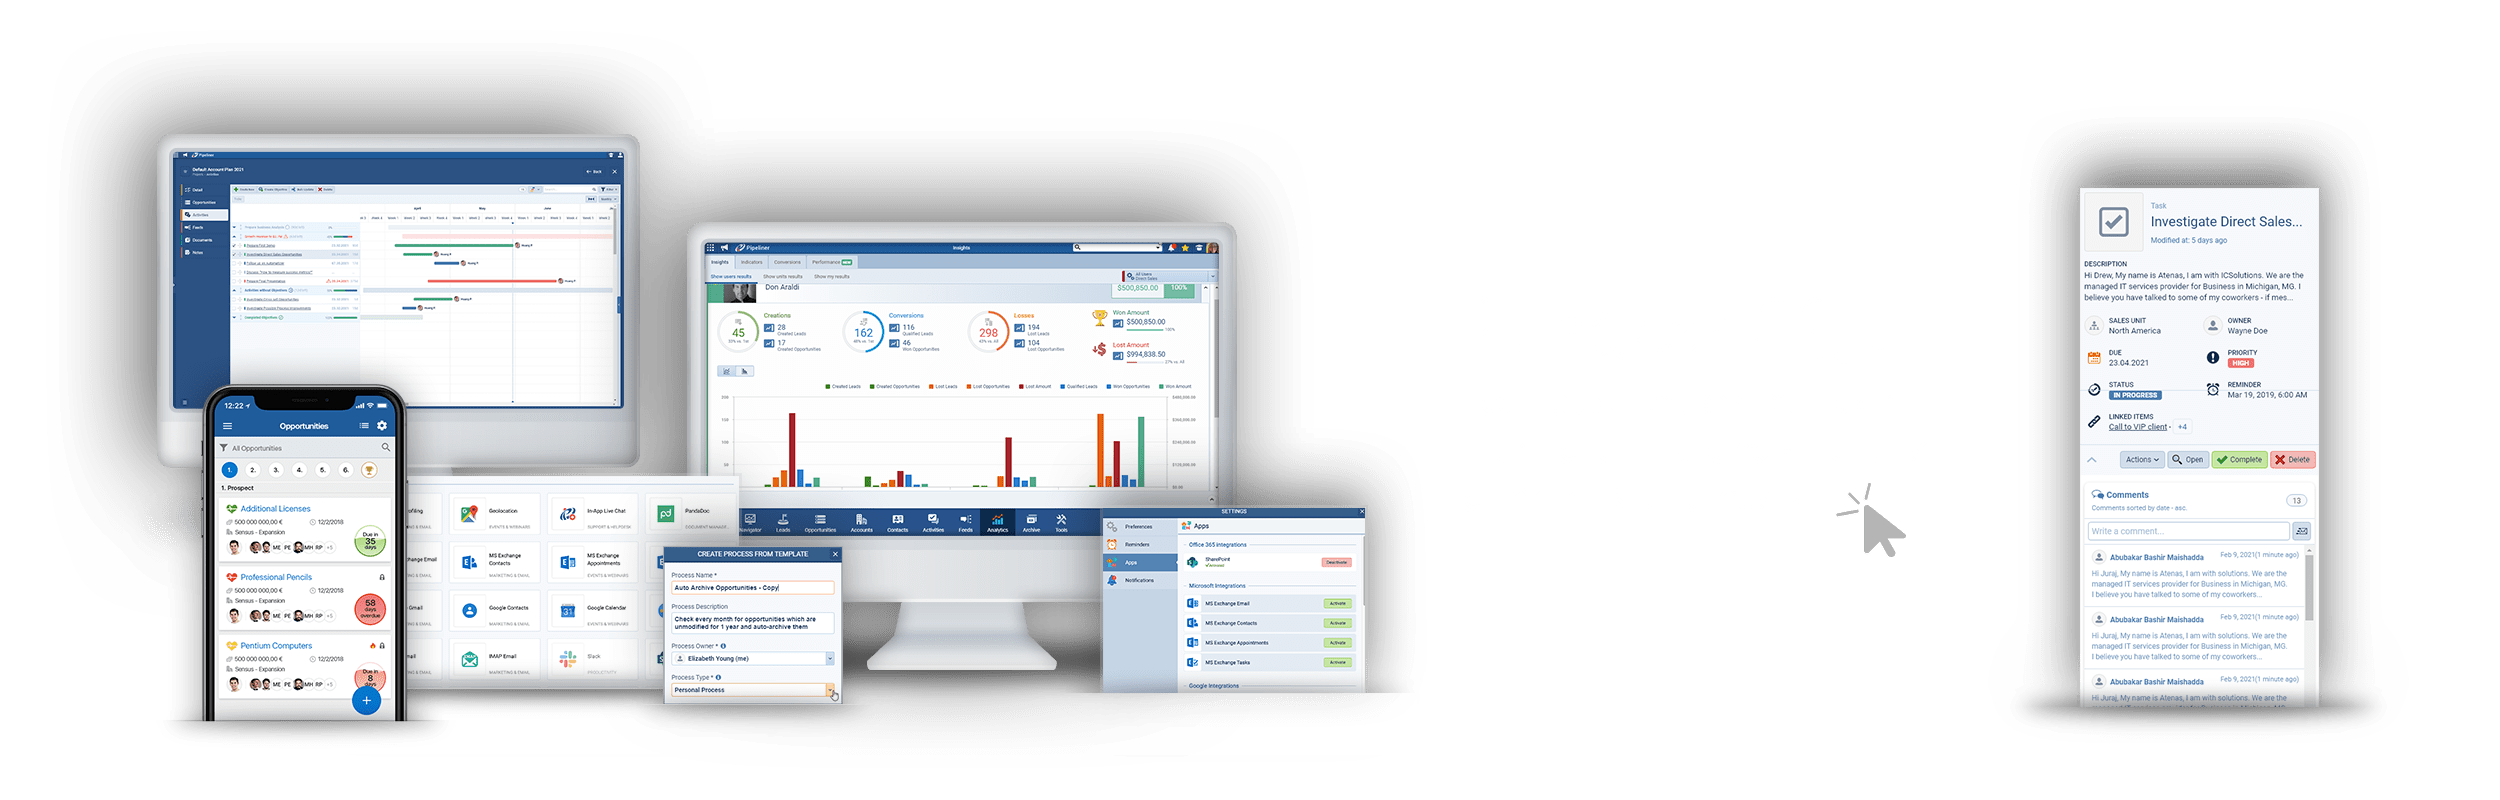 Pipeliner CRM - Learn about key fetures and how they drive efficiency and productivity